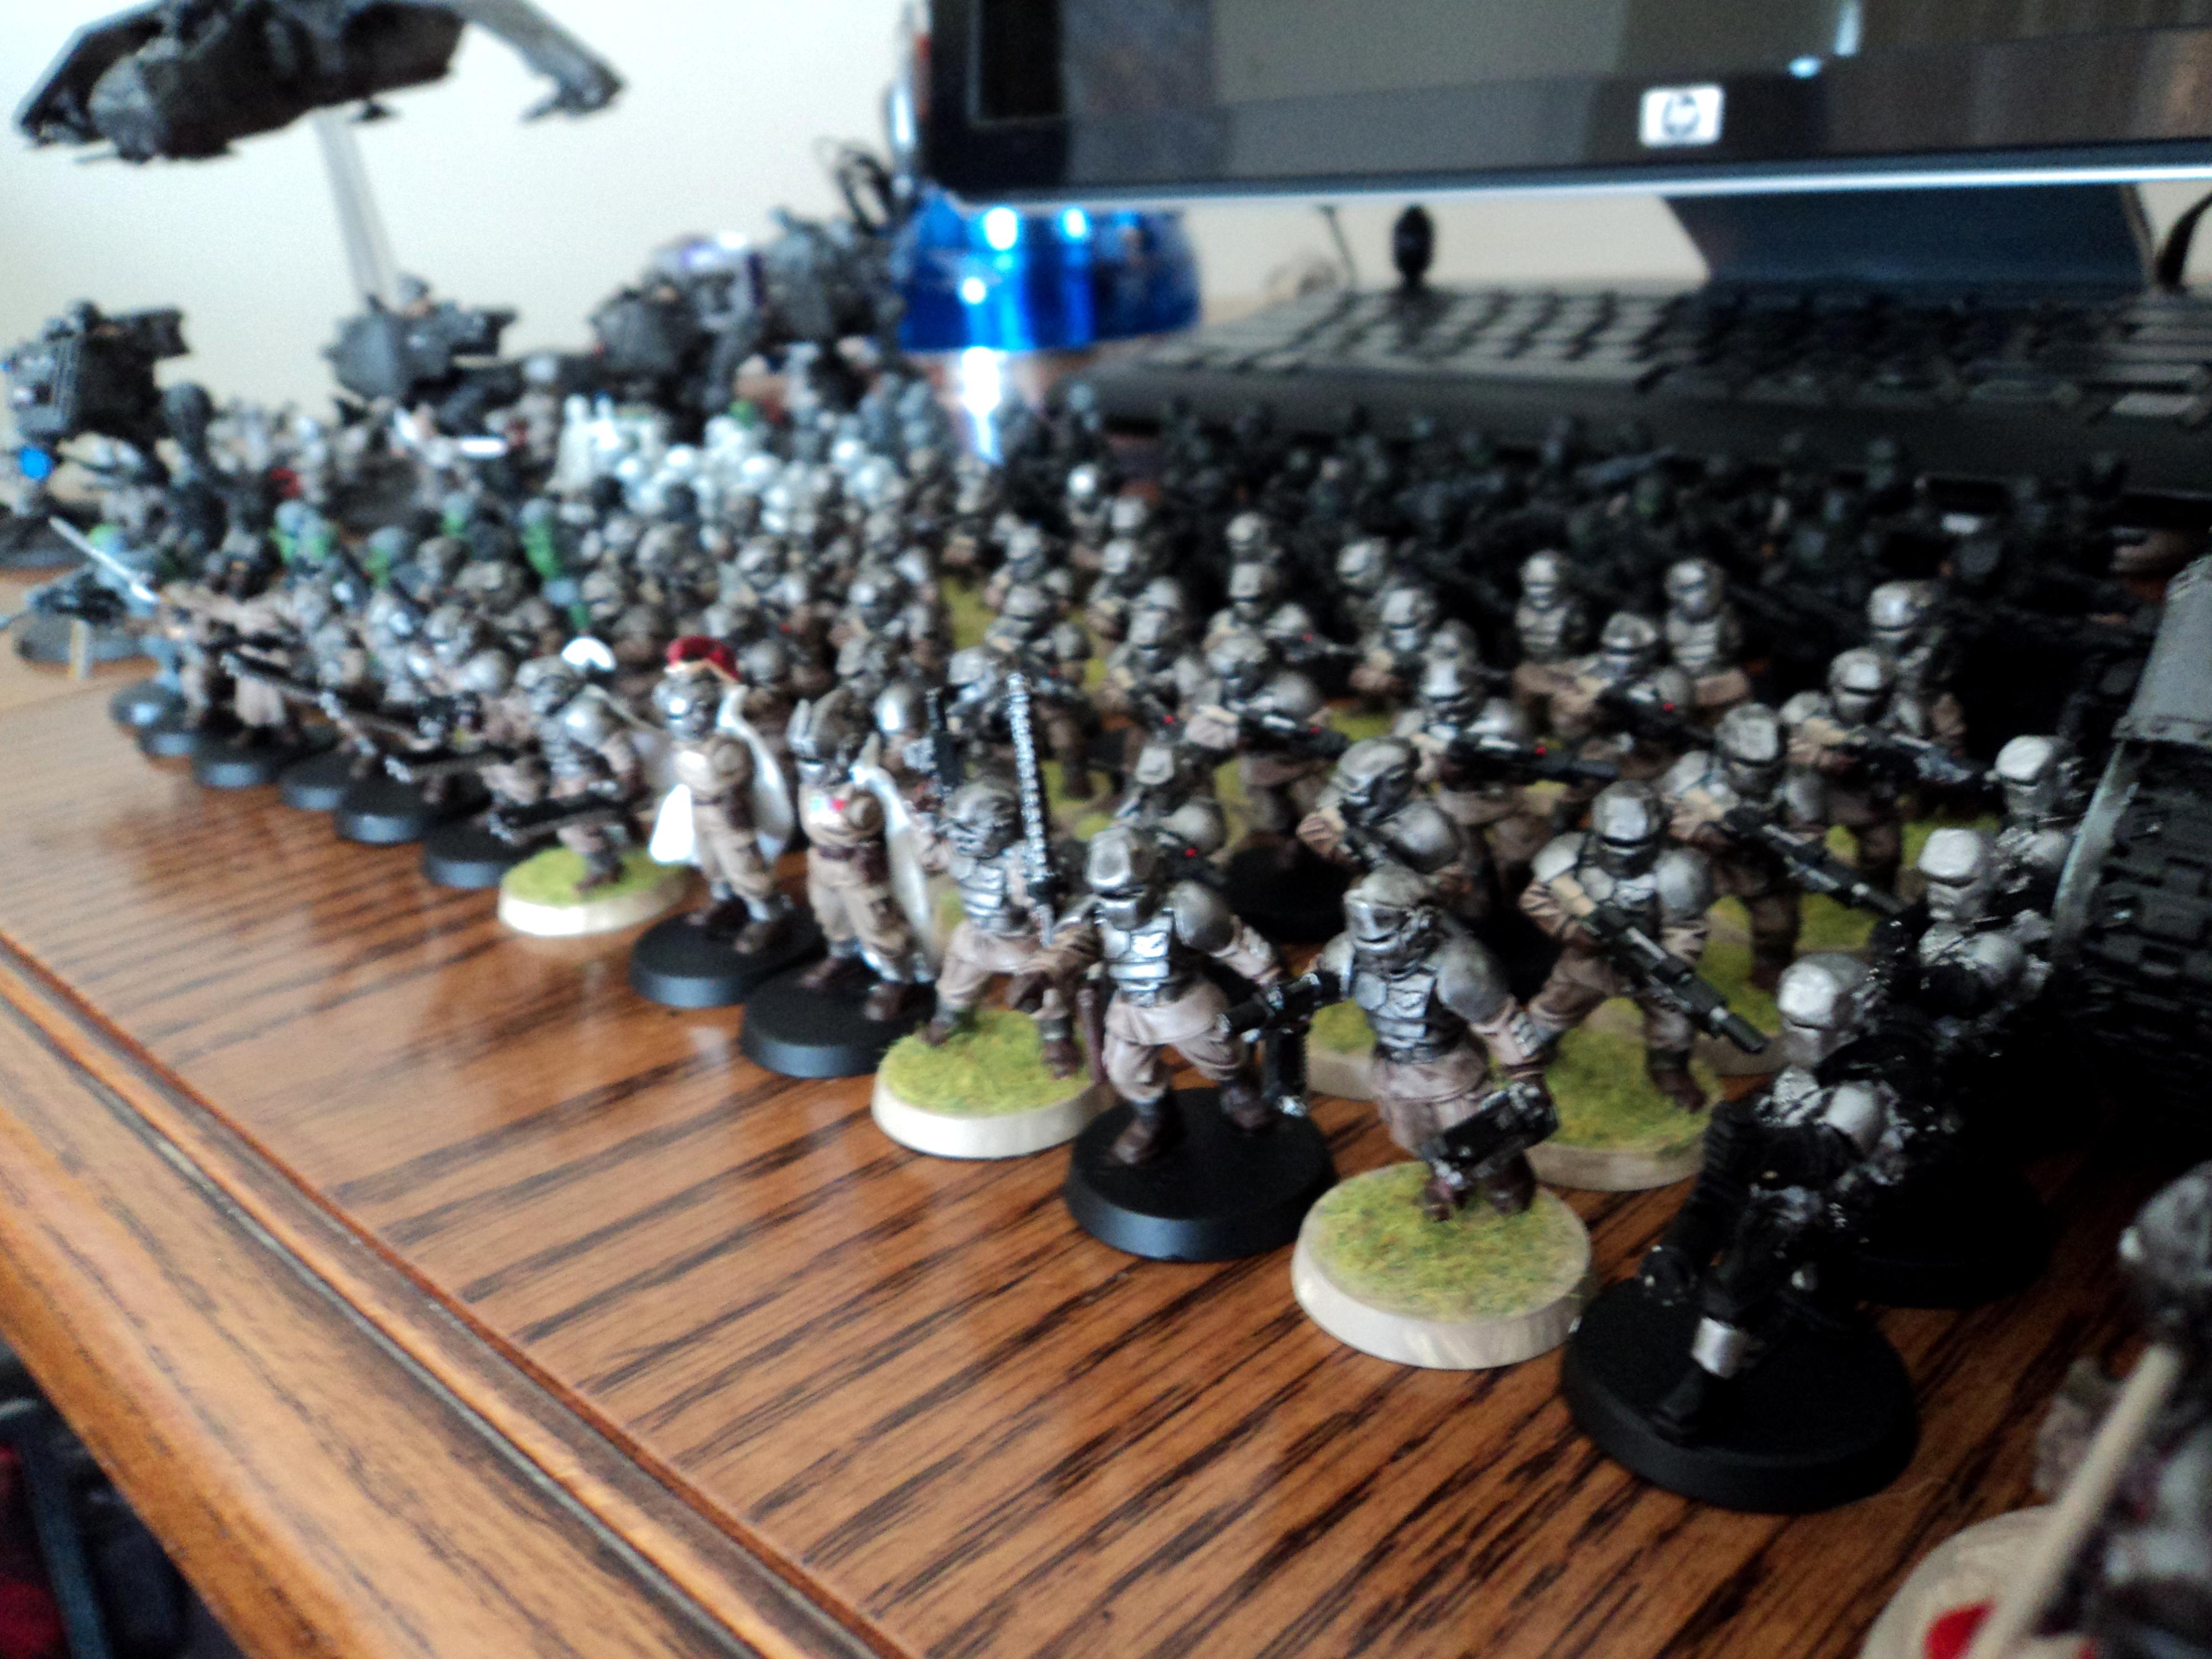 Imperial Guard, more troopas